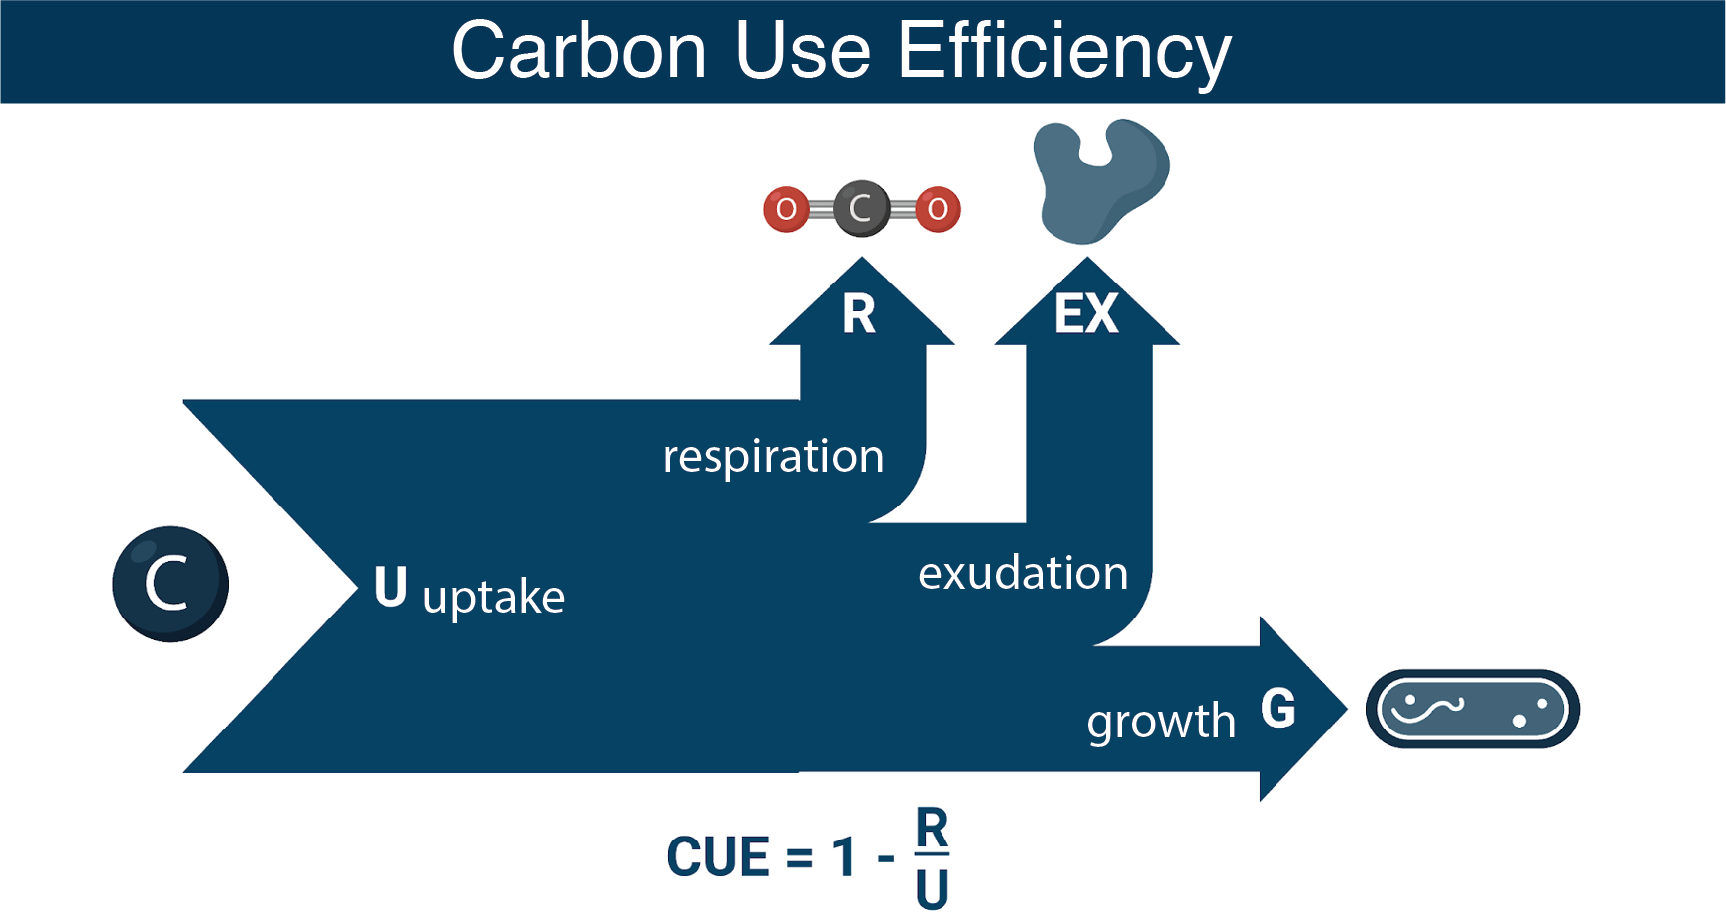 Inputs and outputs of carbon use efficiency (CUE); a detailed description is provided in the caption for this figure.